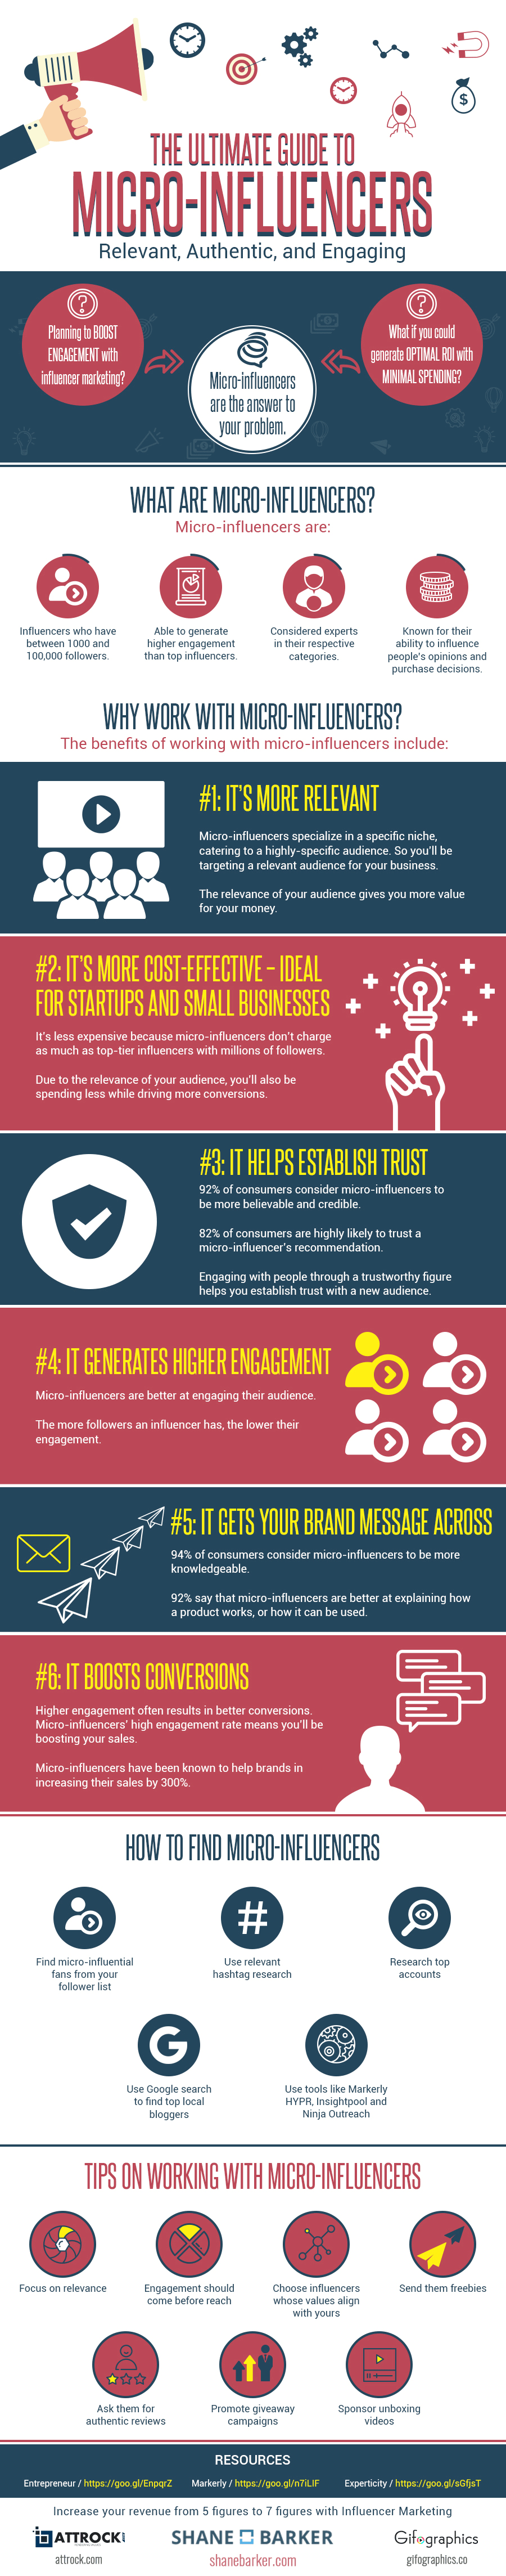 The-Ultimate-Guide-to-Micro-Influencers-Gifographic